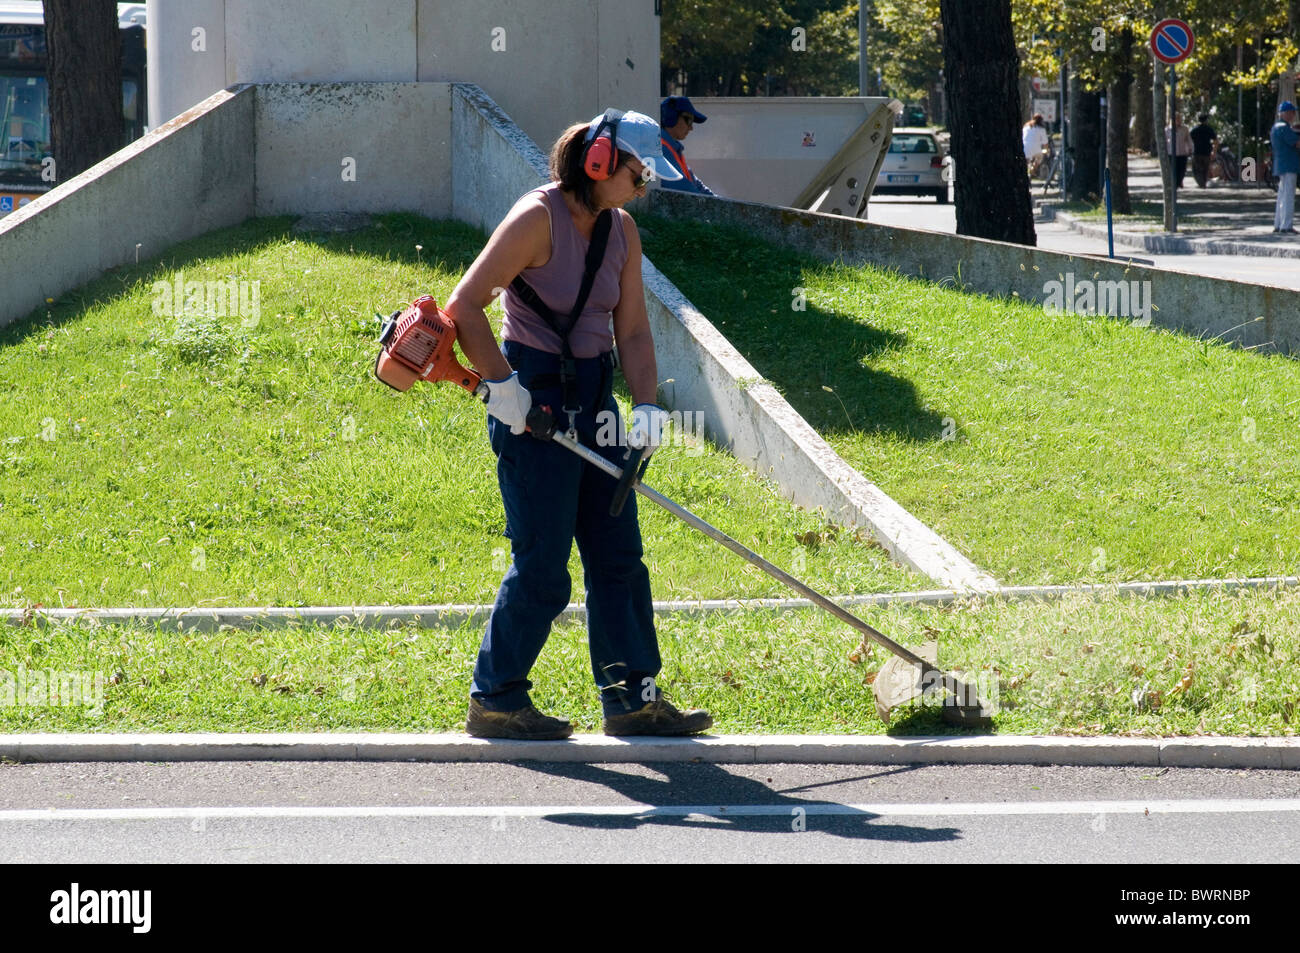 strimmer strimmers strimming gardener gardening cutting grass tidying tidy trim trimming municipal worker council contractor ear Stock Photo